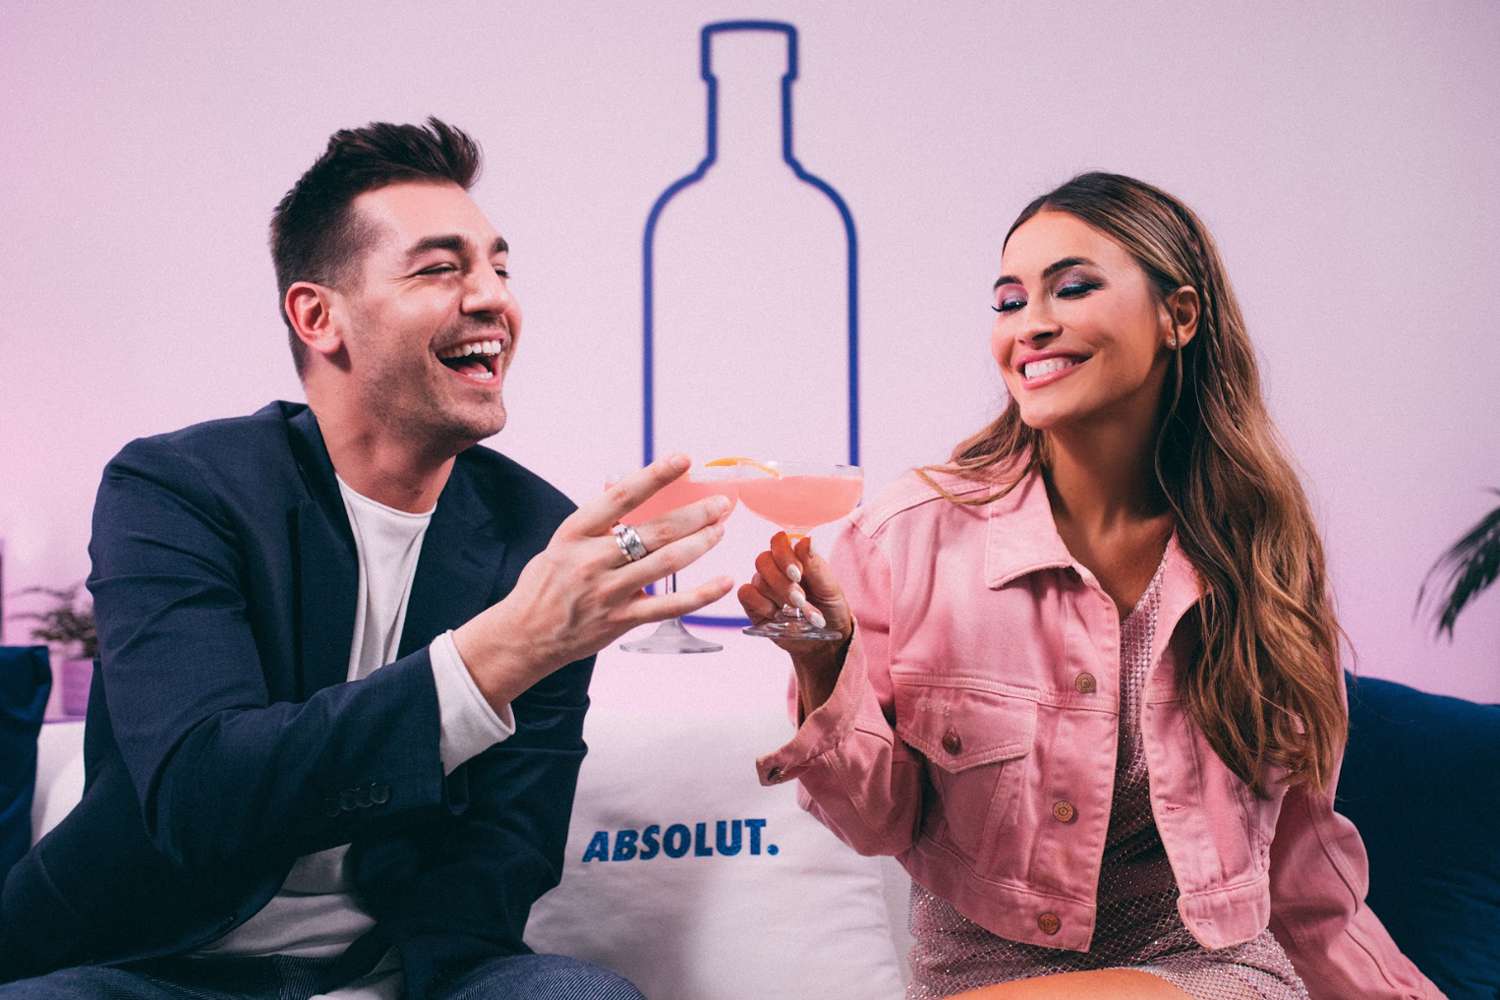 Absolut Vodka Launches Exclusive Video Series for Coachella with Matt Rogers and Chrishell Stause